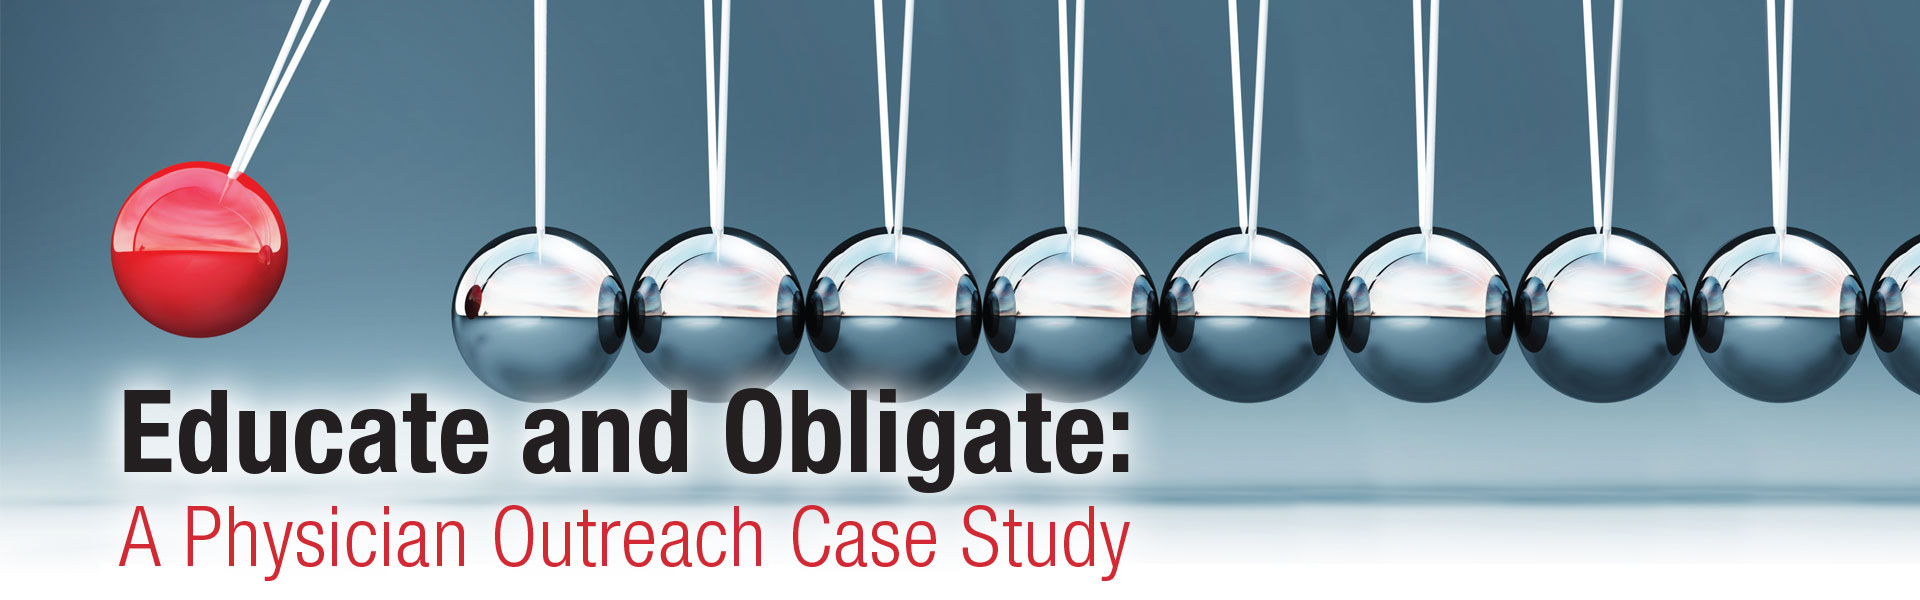 Educate and Obligate: A Physician Outreach Case Study